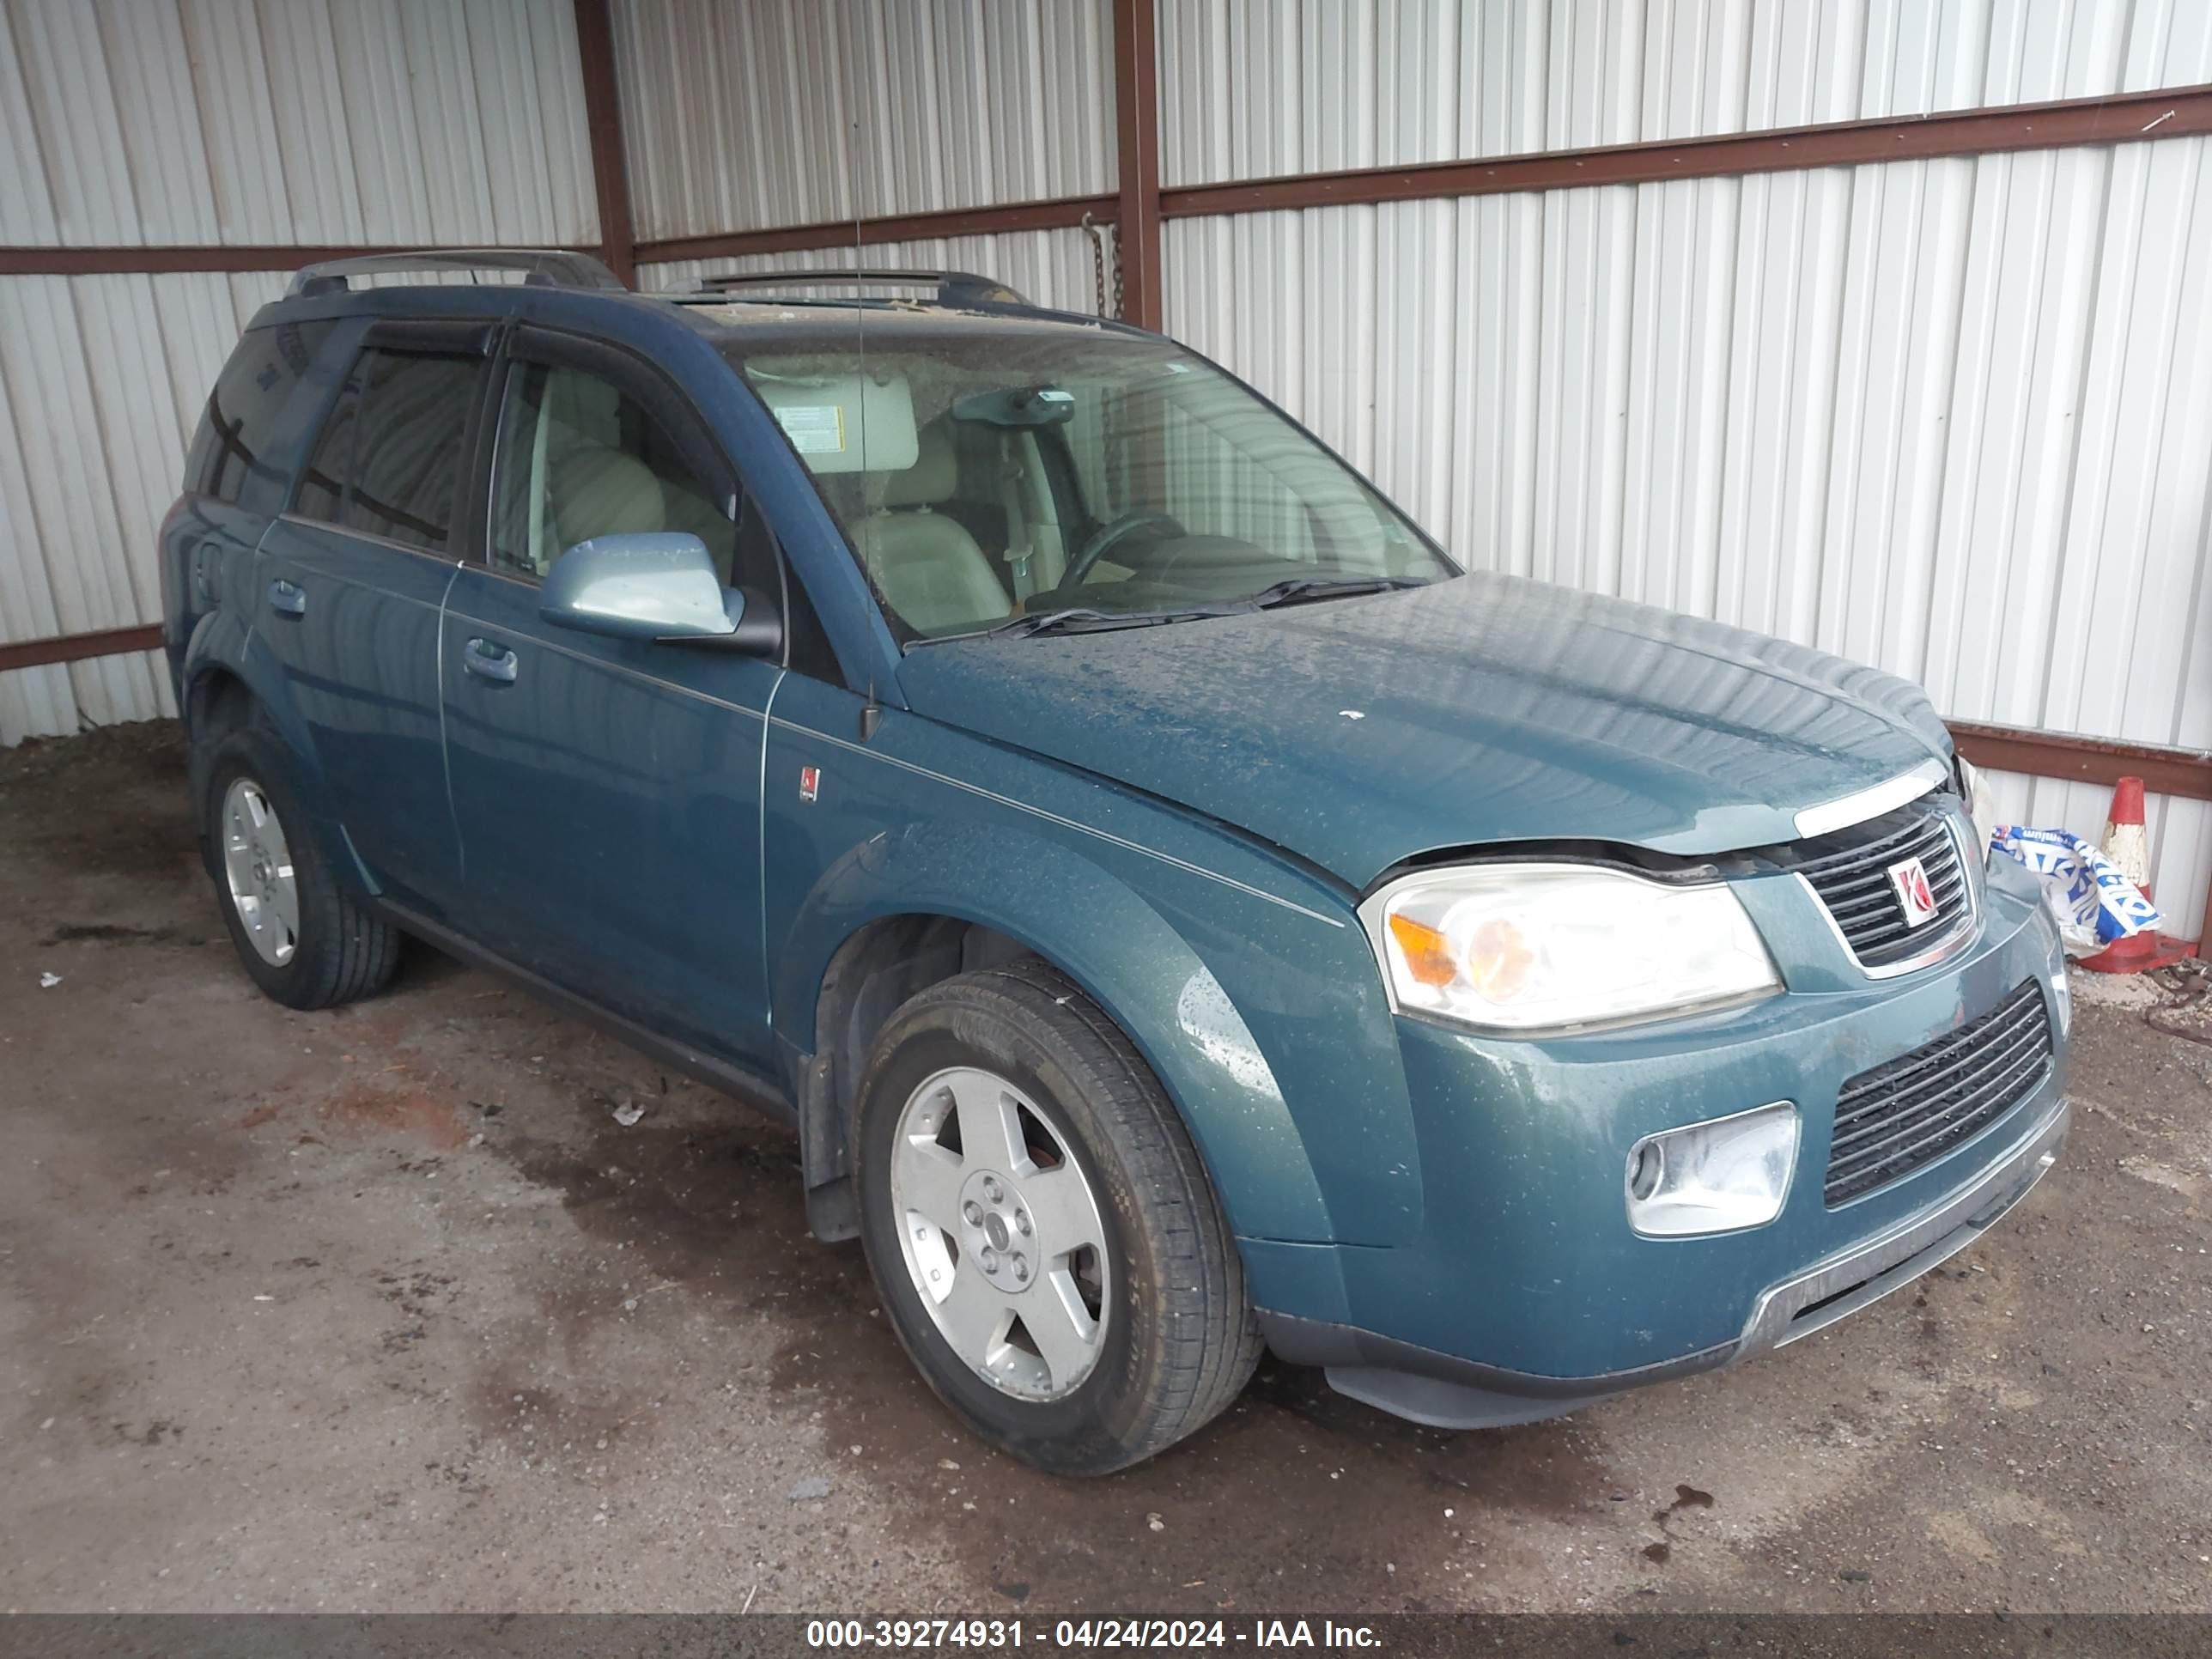 vin: 5GZCZ53477S821298 5GZCZ53477S821298 2007 saturn vue 3500 for Sale in 73121, 7300 N I35 Service Rd., Oklahoma City, Oklahoma, USA